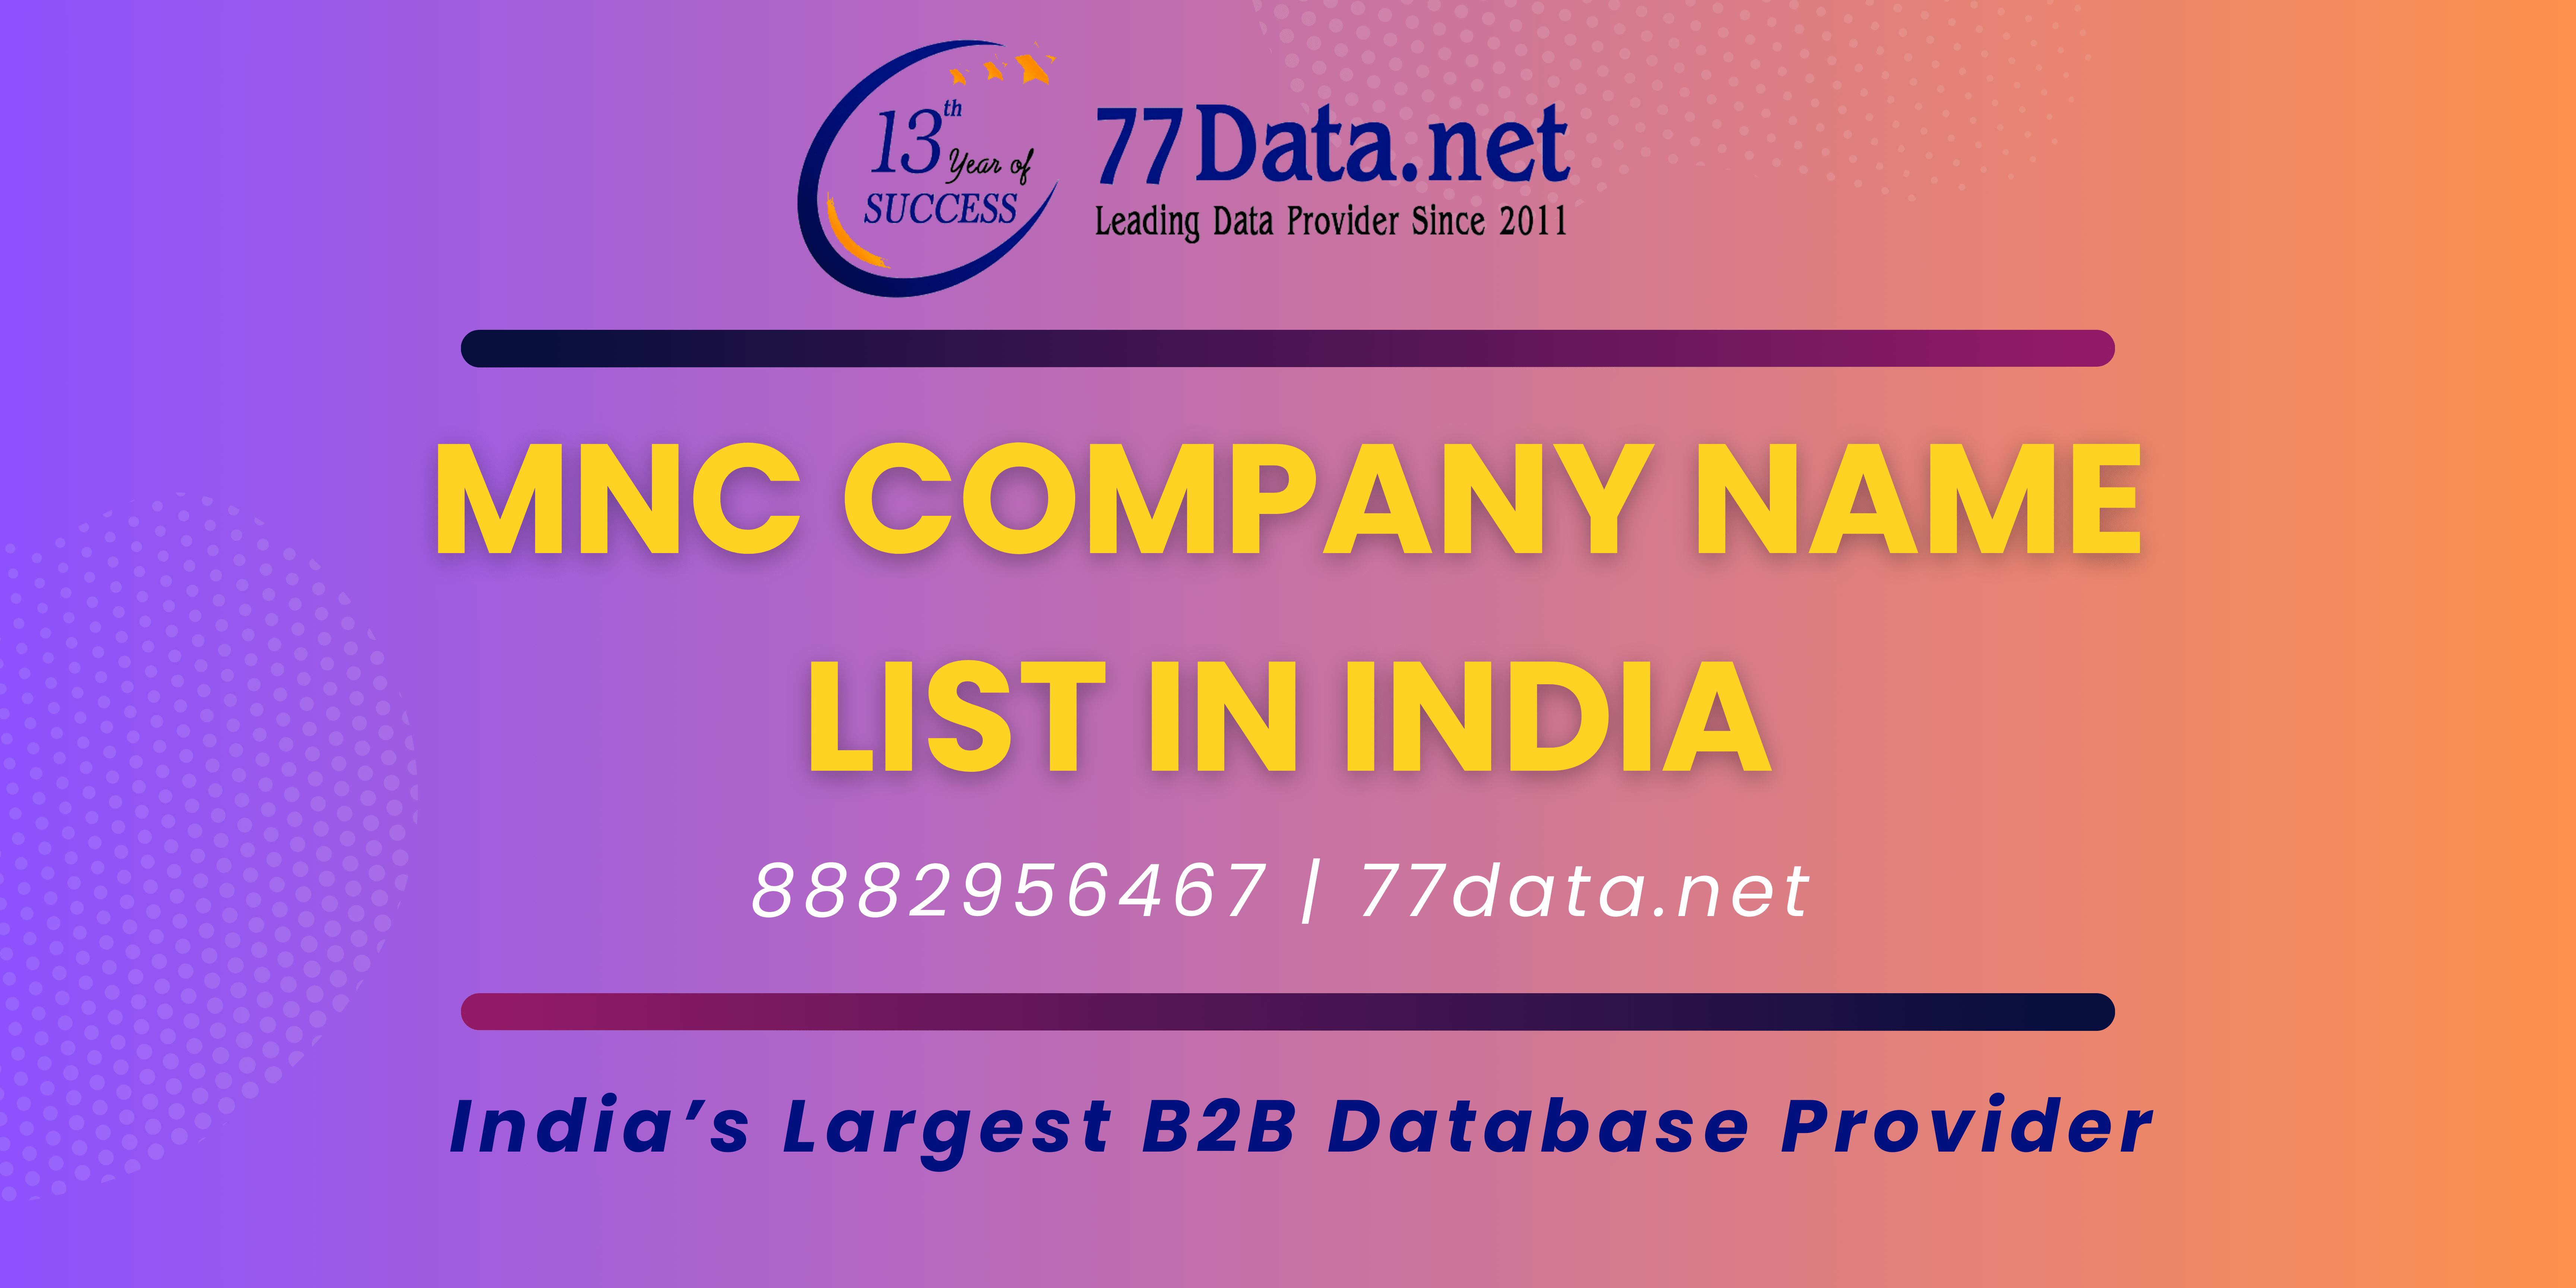 MNC (Multinational) Company Name List in India